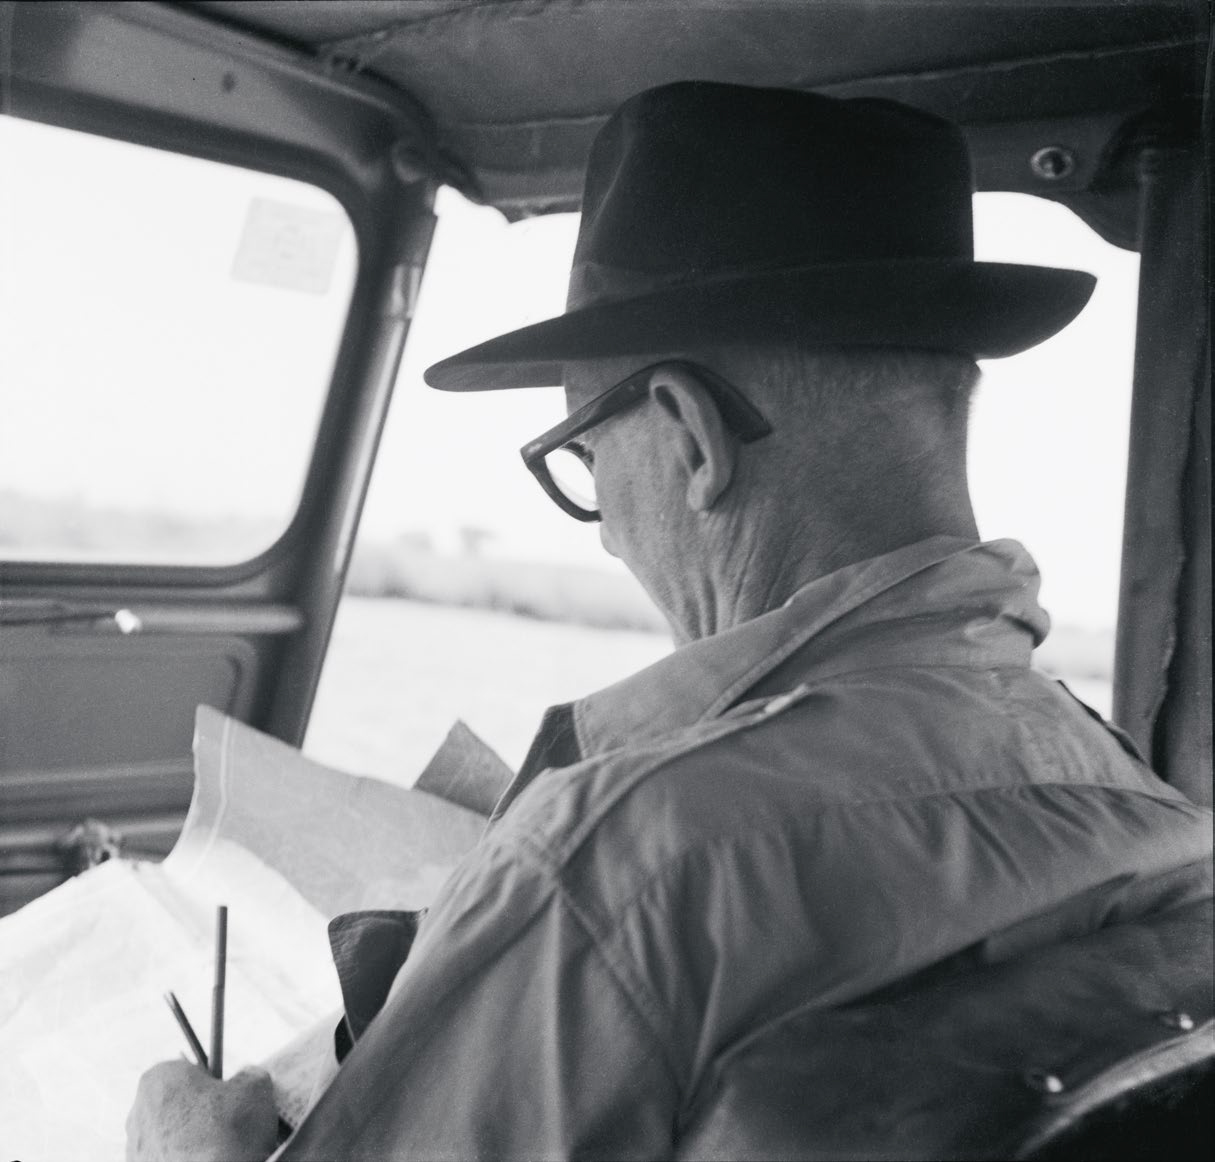 Le Corbusier sitting on the front seat of the jeep while studying a map